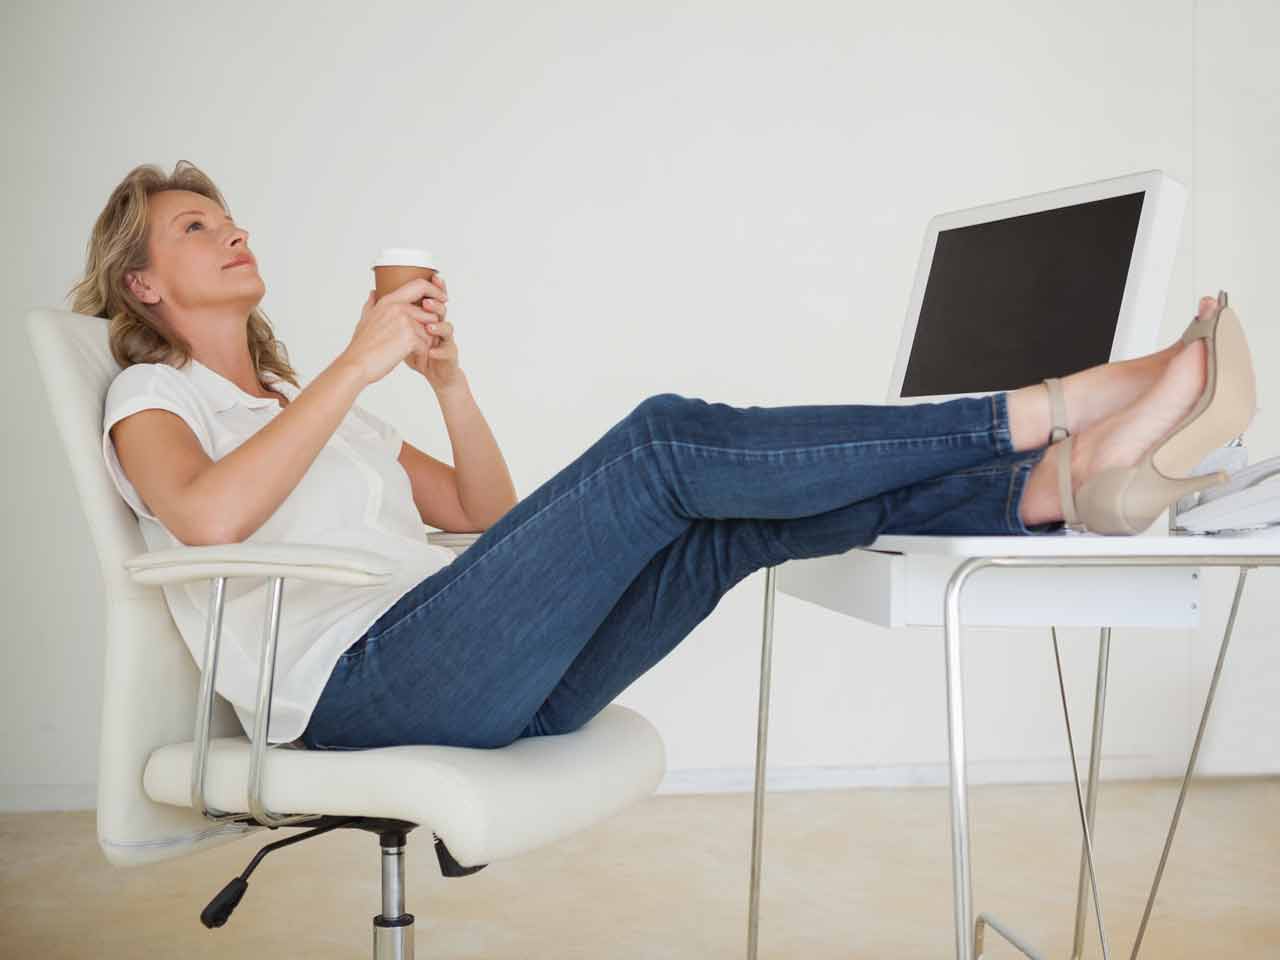 Woman putting her feet up